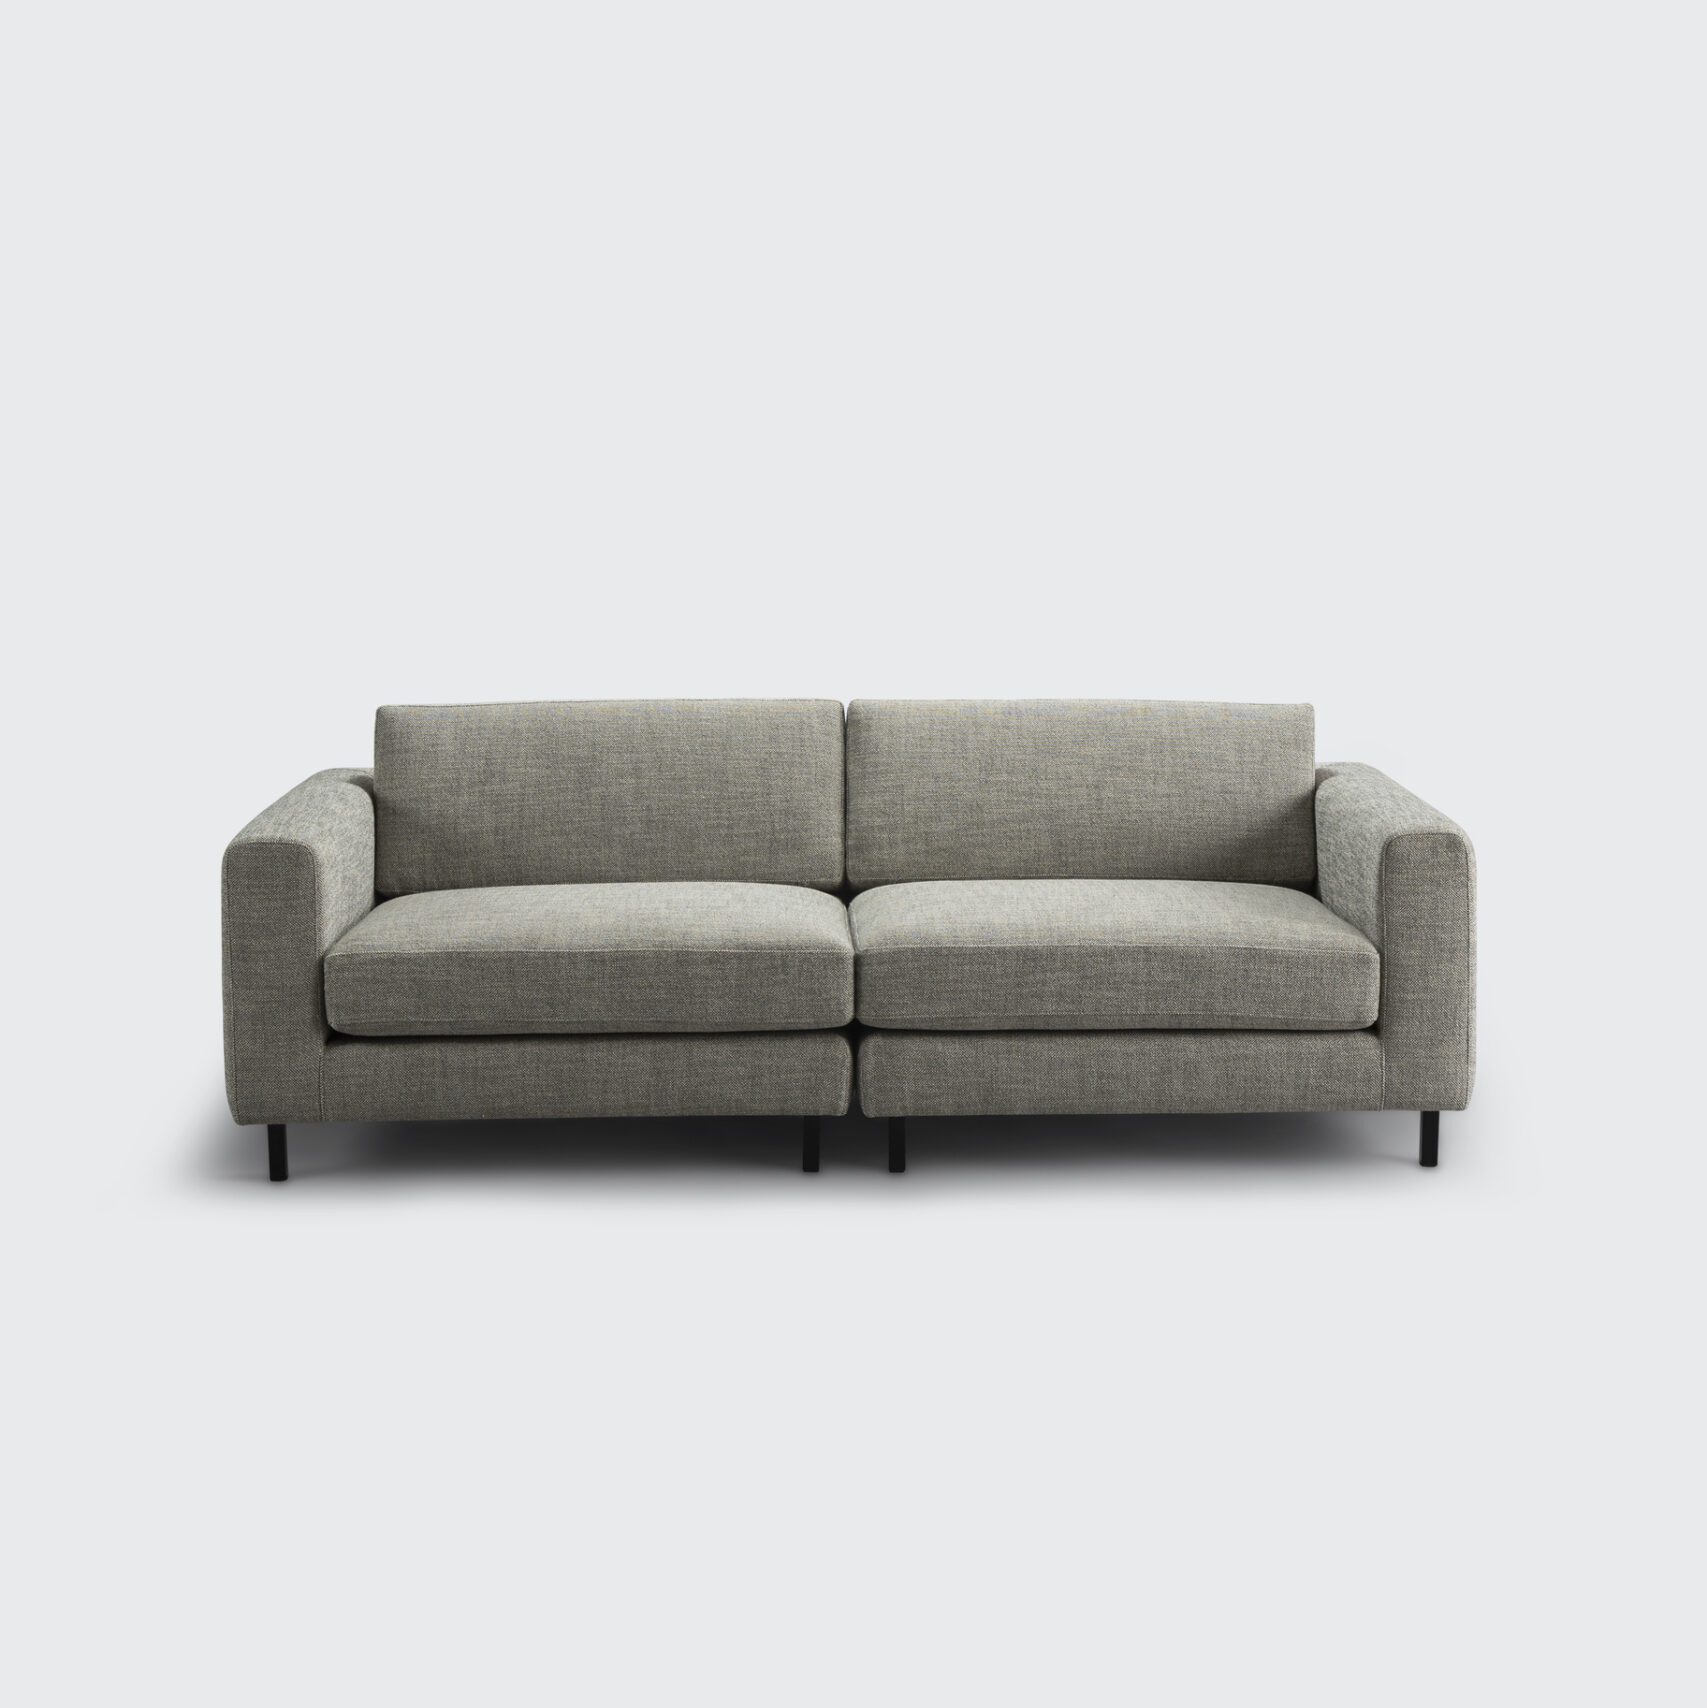 SAV sofa timeless 220 artichoke interior design architecture product furniture luxury_resistant style living room noble lined 220cm decor two separated modules timeless collection